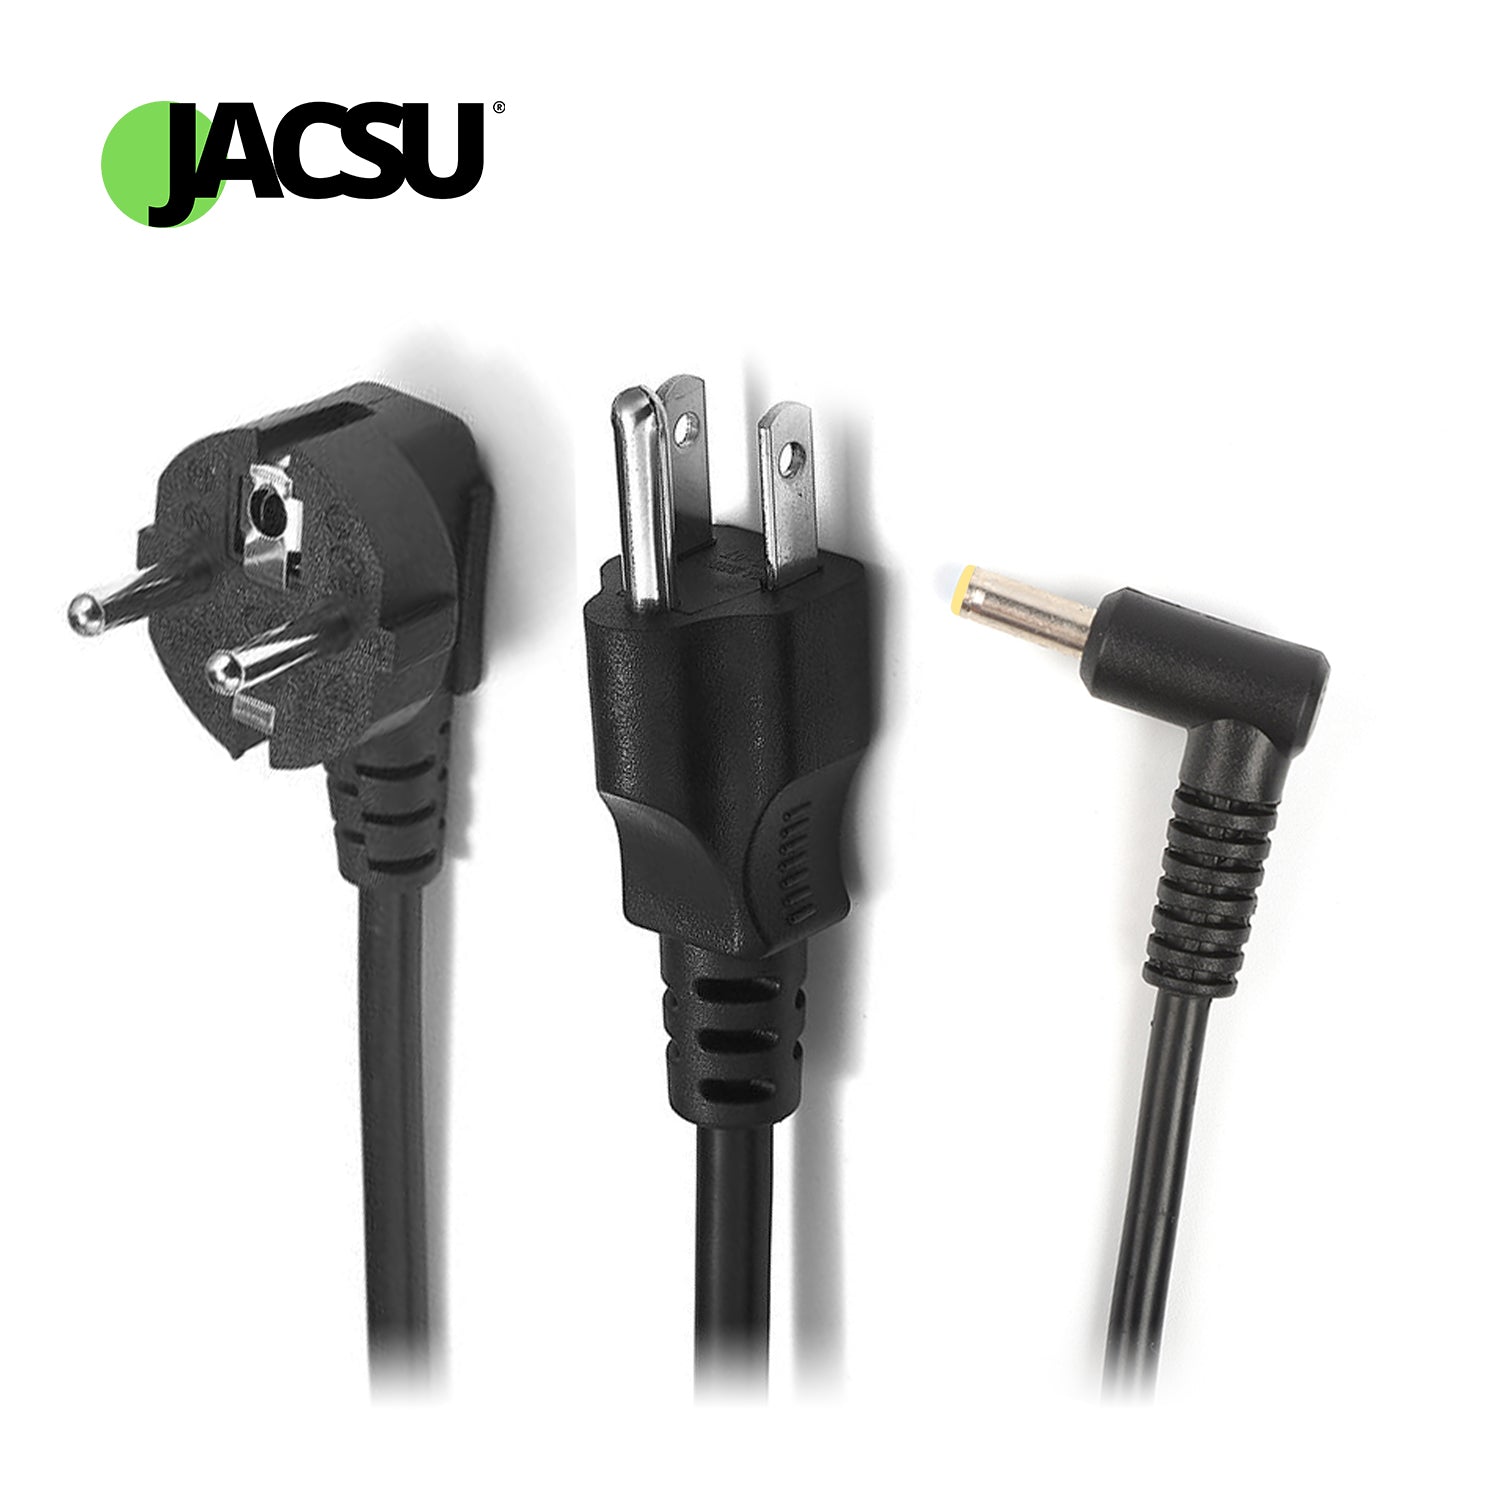 Jacsu 19V 4.74A 90W 5.5x1.7mm Laptop AC Adapter Charger For ACER ASPIRE 5750G 5755G 7110 9300 Notebook